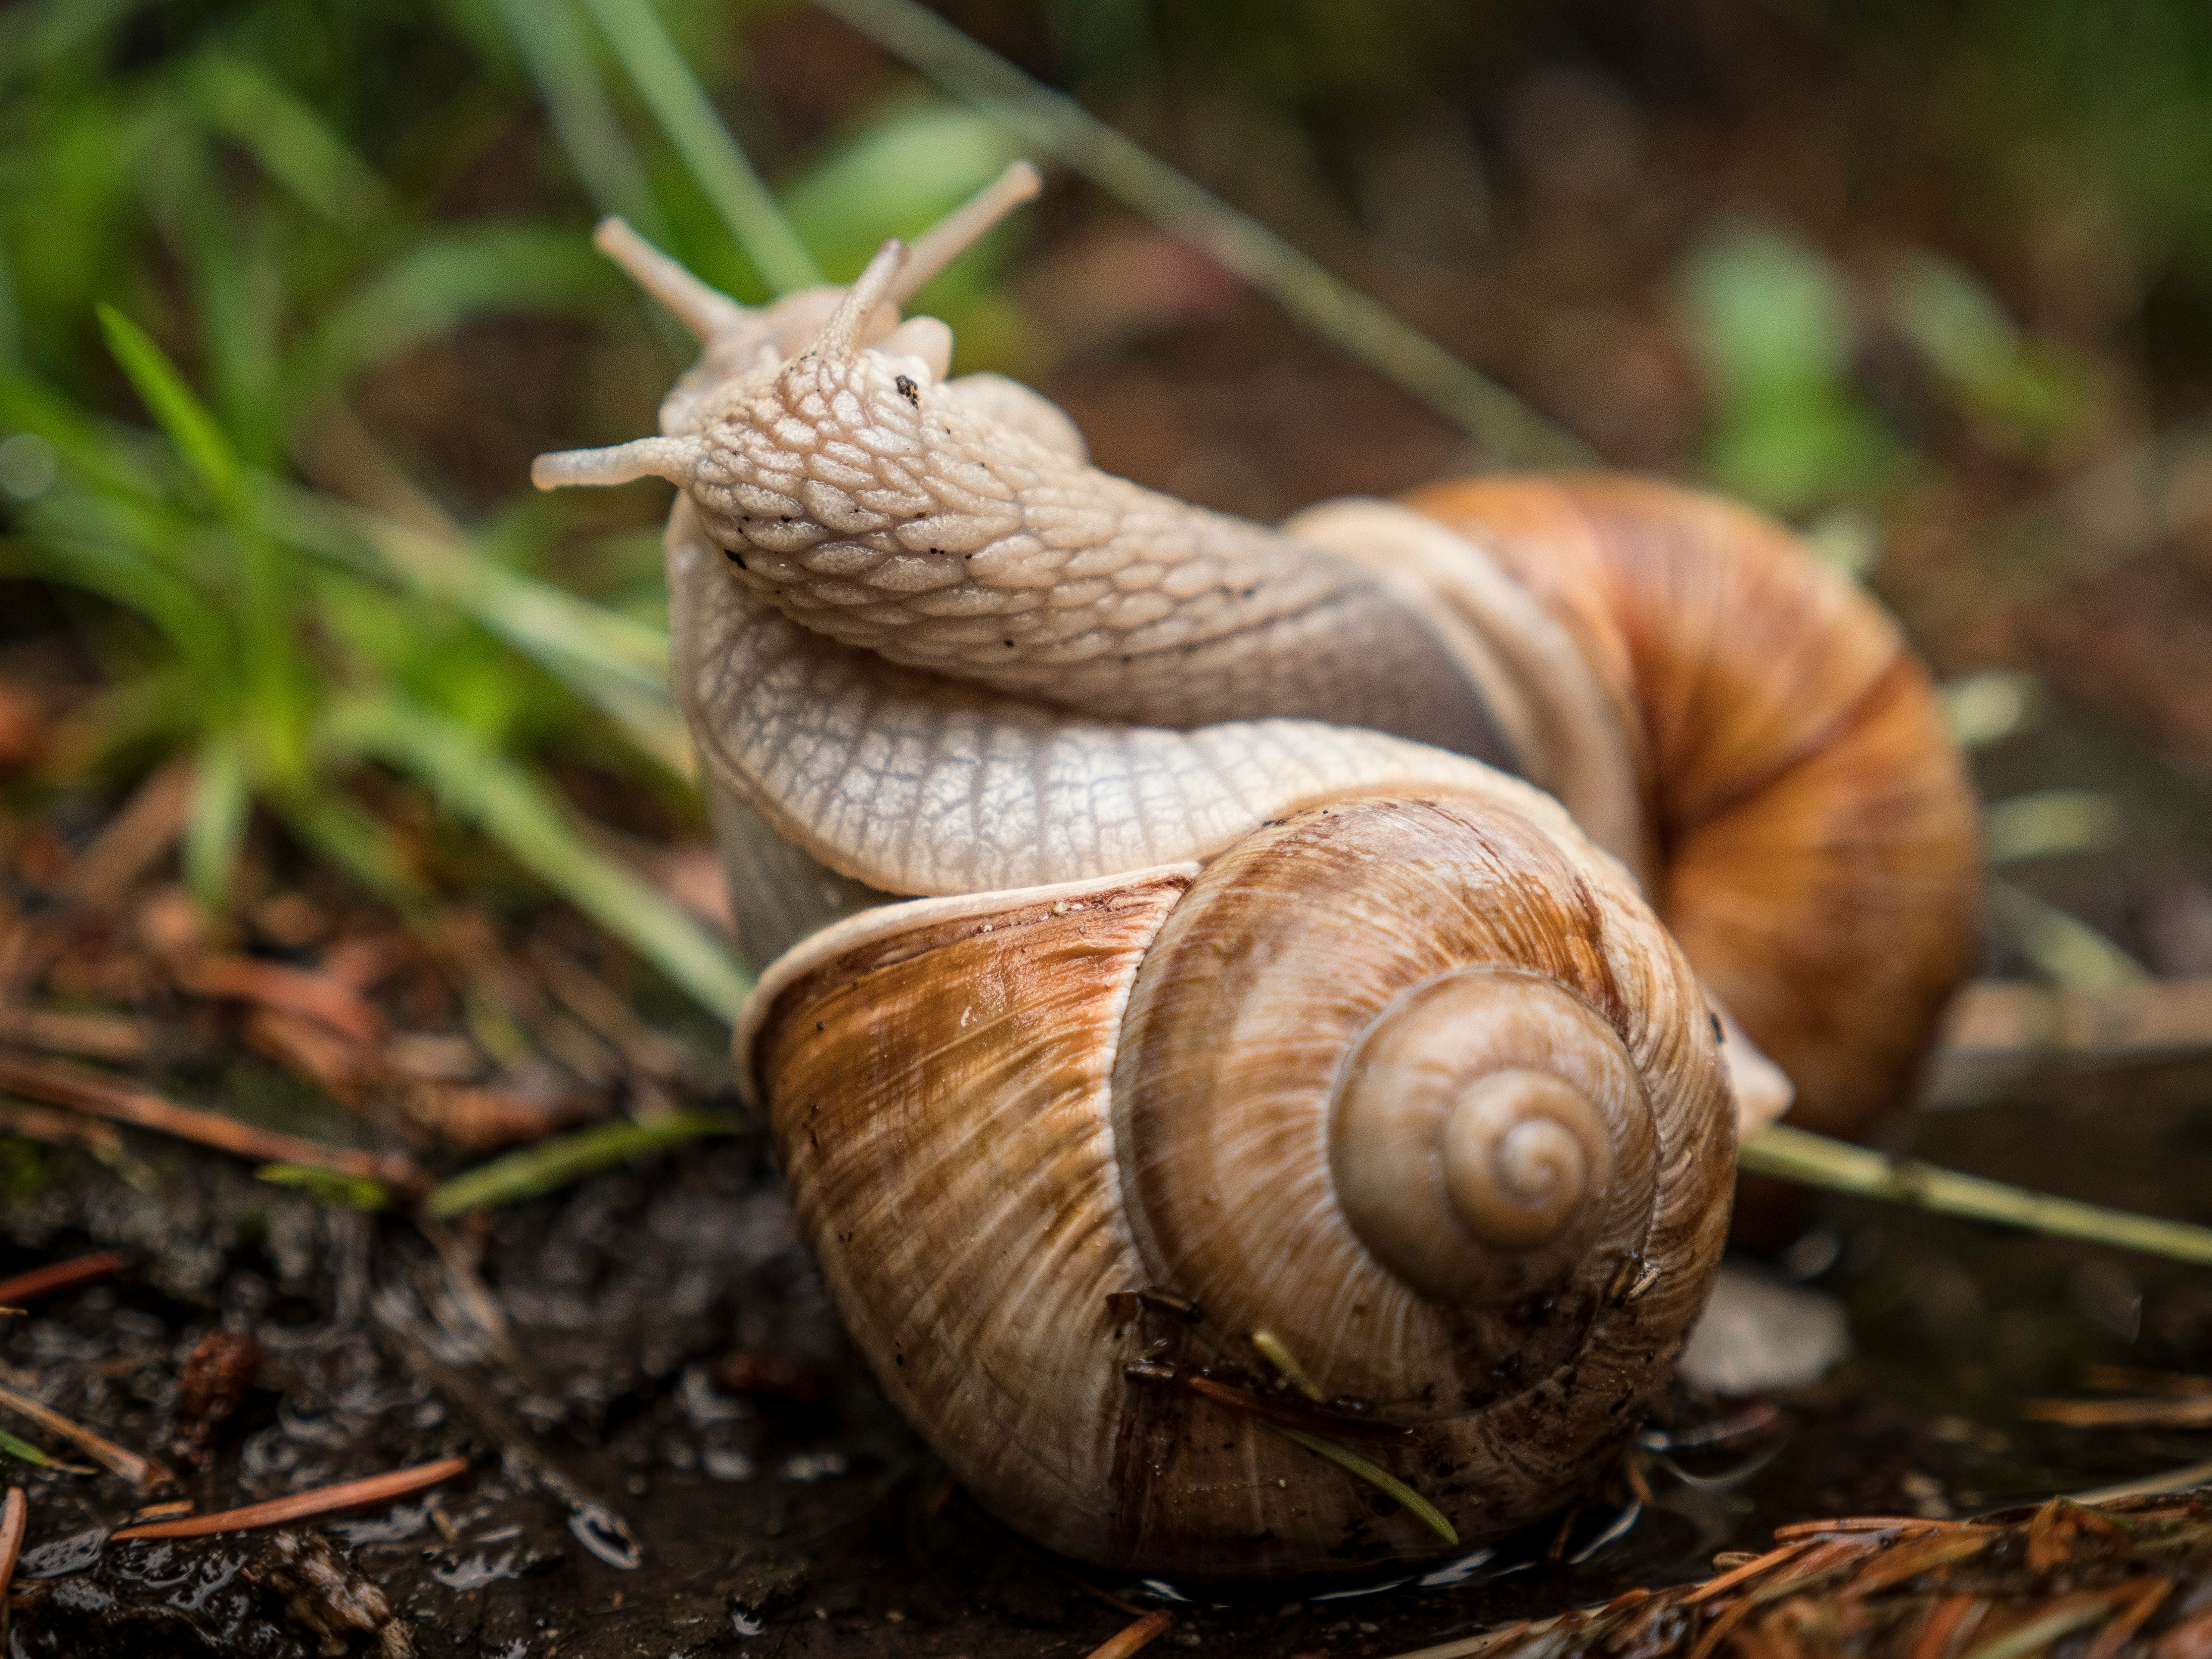 brown and white snail on ground during daytime